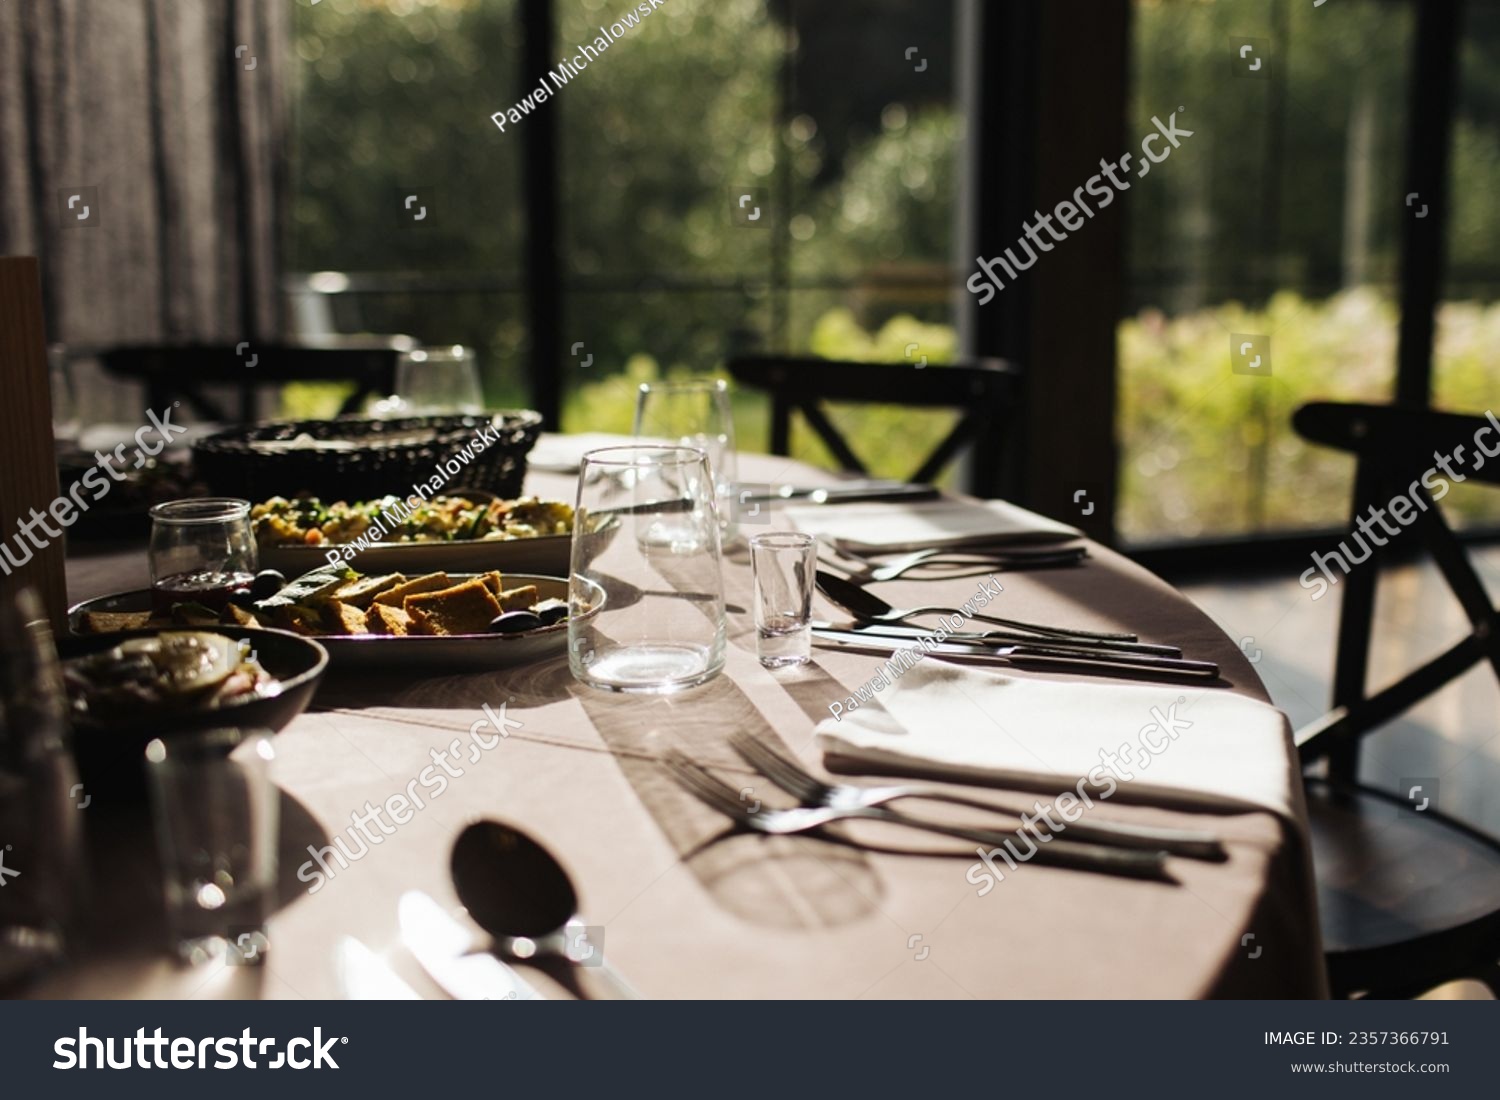 Luxurious Restaurant Table with shiny cutlery. Opulent Setting for Fine Dining Experience. High end restaurant. Romantic dinner in sunset light. Sunlight table. Vodka shot glass. #2357366791